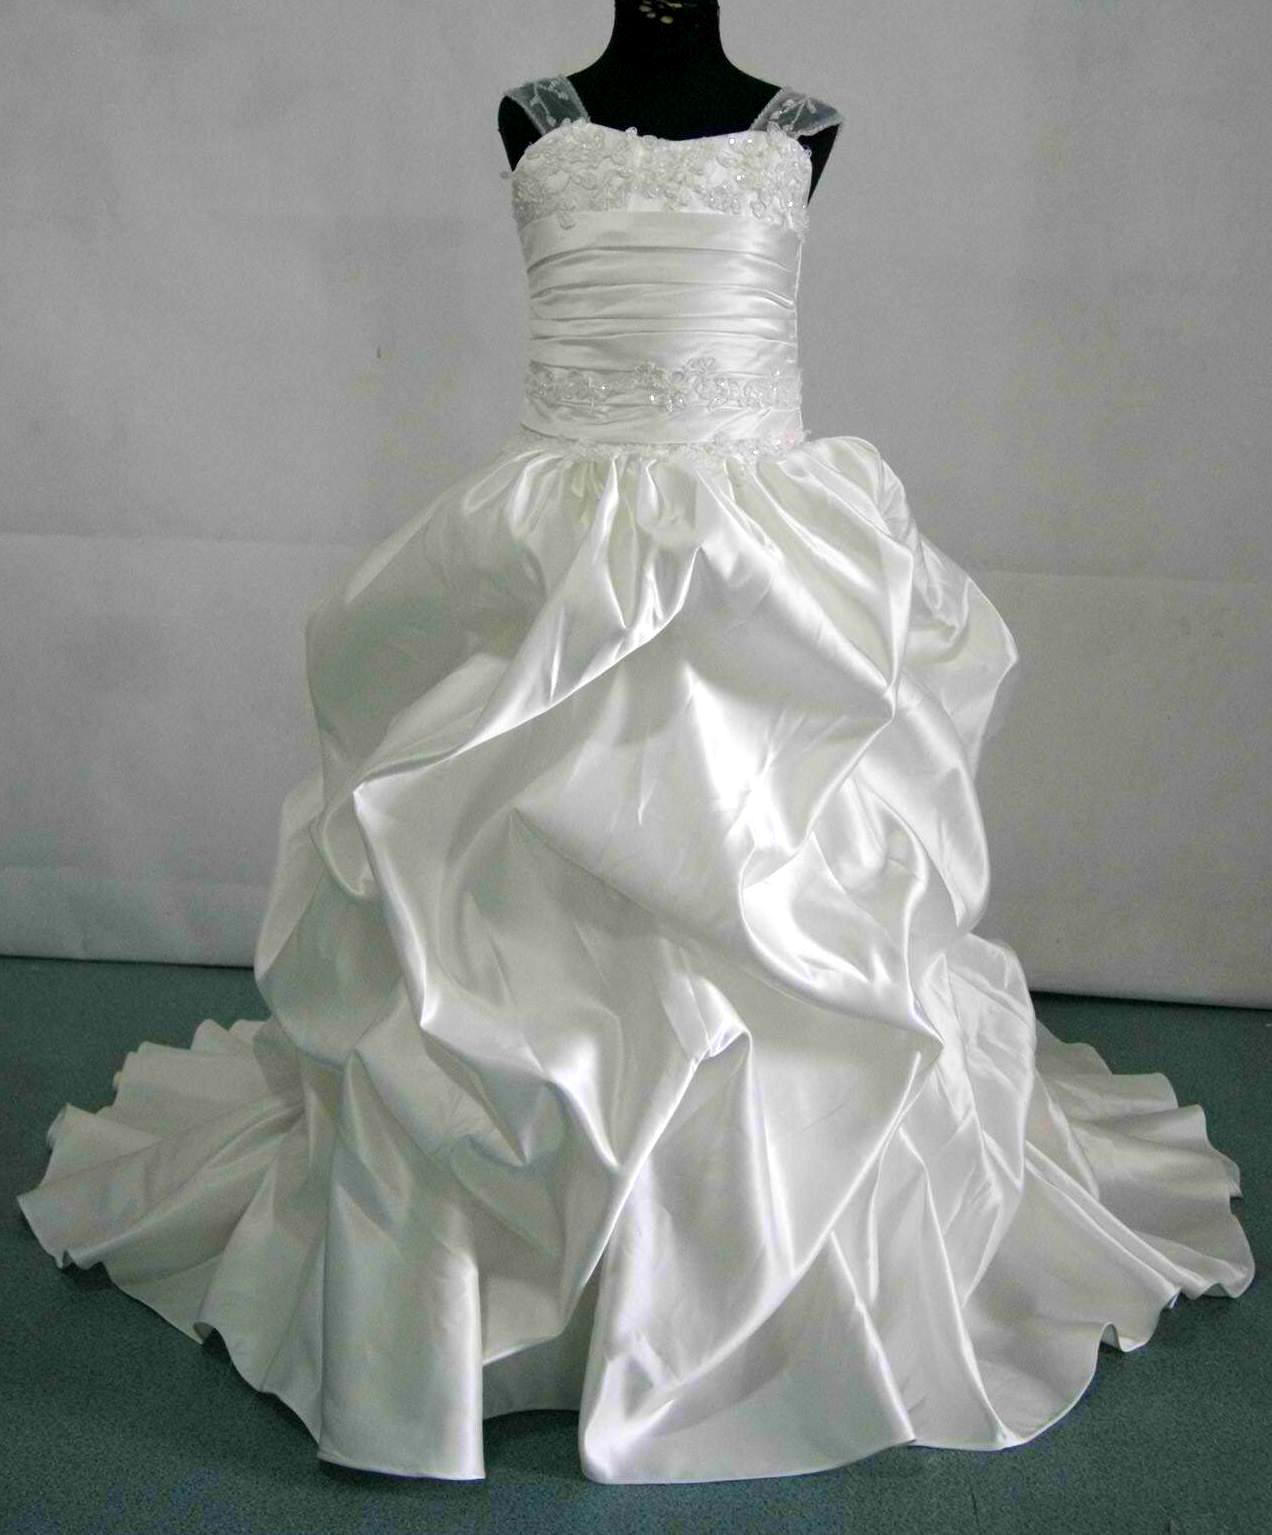 infant size wedding gown